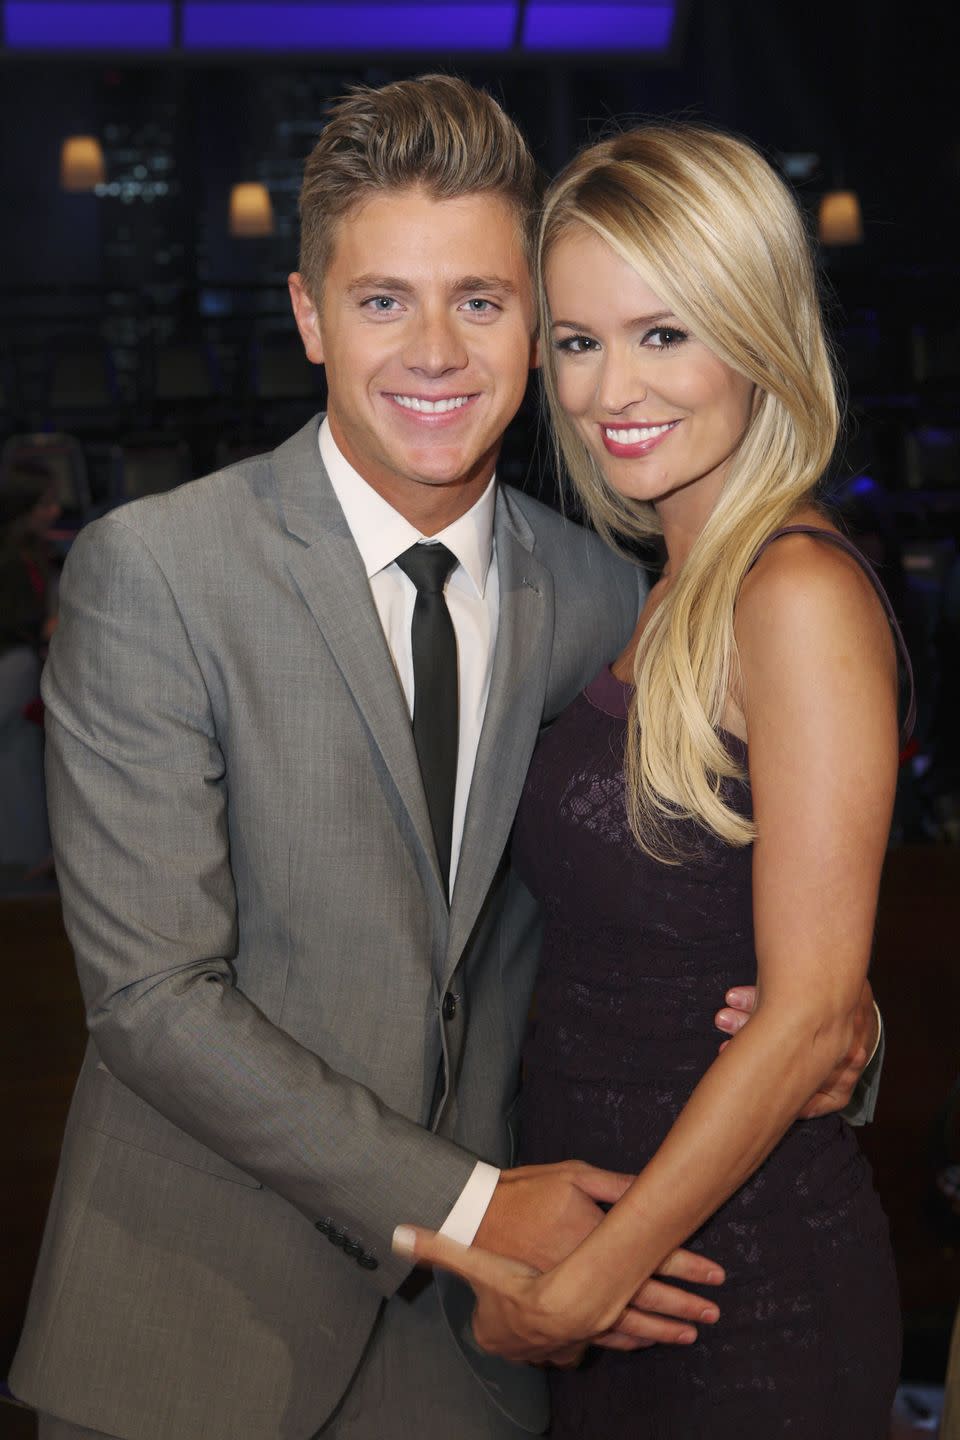 <p><strong>Relationship length: 4 months</strong></p><p>Emily Maynard chose Jef Holm at the end of her journey on season 8 of <em>The Bachelorette</em>. The couple got engaged and Jef relocated to be with Emily and her daughter in Charlotte, North Carolina. Unfortunately, the couple broke off their engagement in a mutual split 4 months later. </p><p>"As you know, at first I wasn't sure that I should even be <em>The Bachelorette</em>, but I am a hopeless romantic and I do believe in the show," Emily <a href="https://people.com/tv/emily-maynard-and-jef-holm-split-up-they-confirm/" rel="nofollow noopener" target="_blank" data-ylk="slk:told PEOPLE at the time" class="link ">told <em>PEOPLE</em> at the time</a>. "I have no regrets because I did find love and shared an incredible journey with a really special person—and you know what, we tried our best because the love between us was so real."</p><p>Months after the split, Jef told <em>Us Weekly</em> that they were cordial with each other. "Last time we talked, things were in good spirits," <a href="https://www.usmagazine.com/celebrity-news/news/emily-maynard-and-jef-holm-havent-spoken-in-months-2013255/" rel="nofollow noopener" target="_blank" data-ylk="slk:he said at the time" class="link ">he said at the time</a>. "I hope the best for her. She's an amazing girl. She's just not the person I'm gonna spend the rest of my life with. I think she'll make somebody happy."</p><p>Both of them are doing fine now. Emily is <a href="https://people.com/parents/bachelorette-alum-emily-maynard-welcomes-her-fifth-child/" rel="nofollow noopener" target="_blank" data-ylk="slk:married with five children" class="link ">married with five children</a>. Meanwhile, Jef is dating <em>Too Hot To Handle</em> star <a href="https://www.usmagazine.com/celebrity-news/pictures/bachelorette-alum-jef-holm-packs-on-the-pda-with-francesca-farago/" rel="nofollow noopener" target="_blank" data-ylk="slk:Francesca Farago" class="link ">Francesca Farago</a>. Now THAT is something I didn't see coming.<br></p>